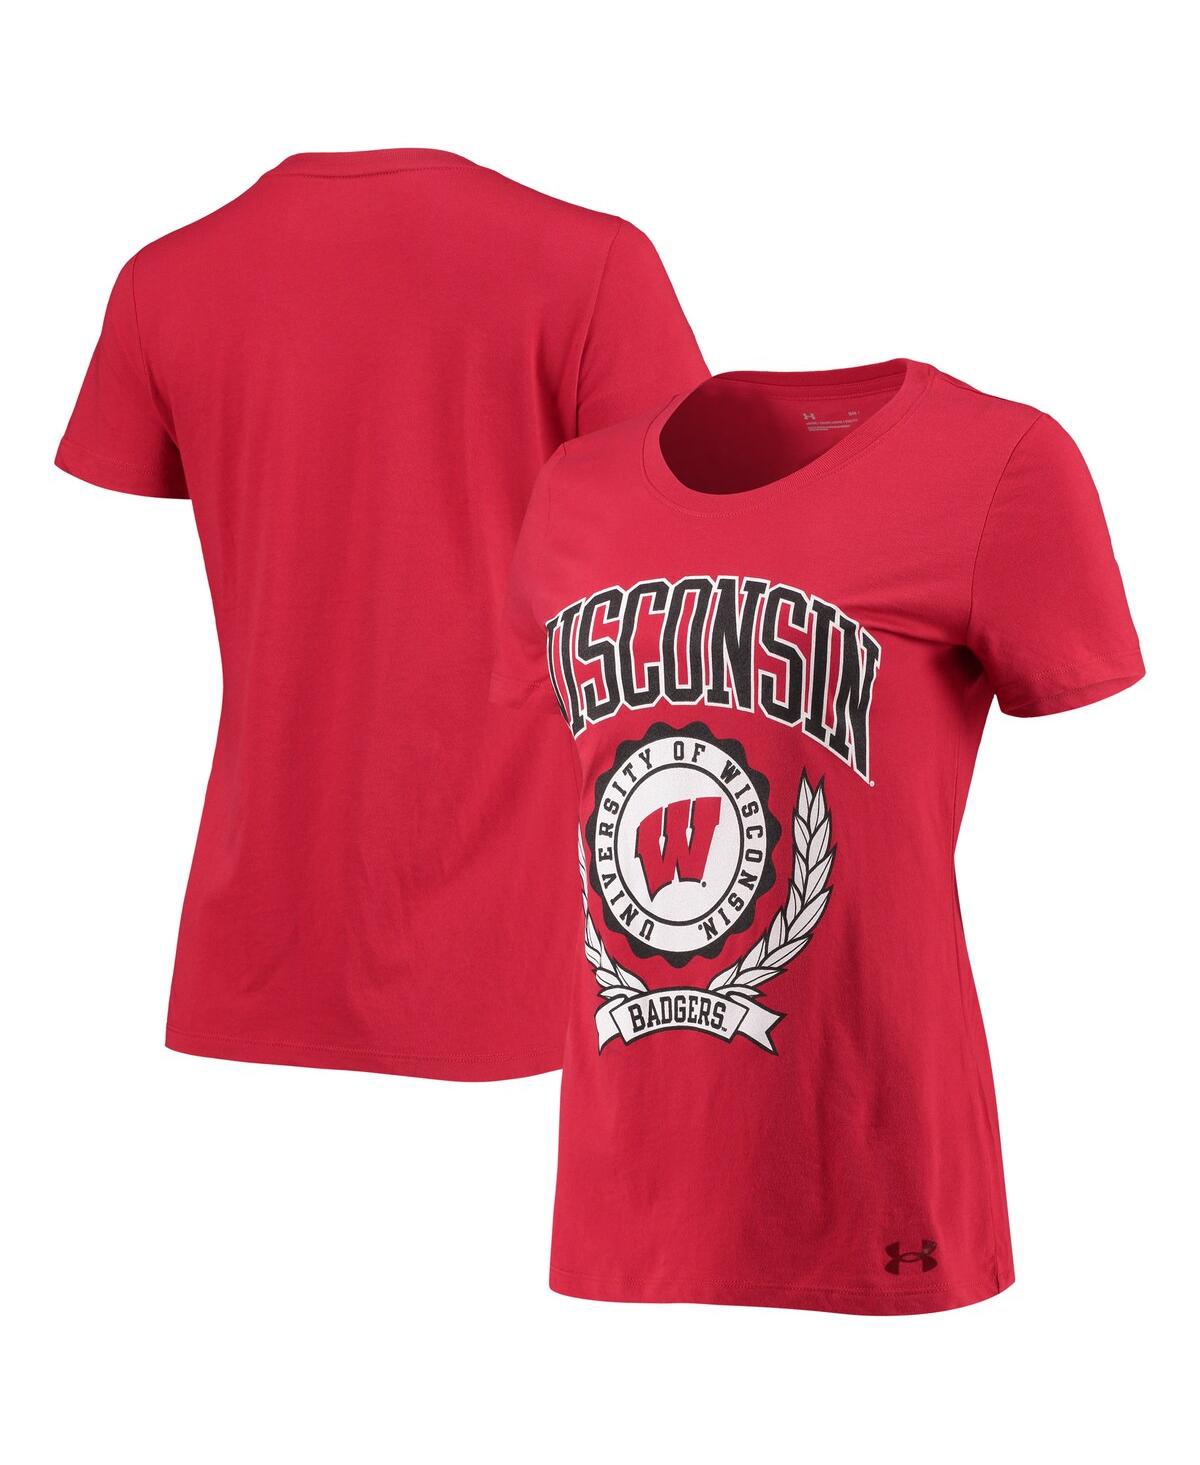 Under Armour Women's  Red Wisconsin Badgers T-shirt